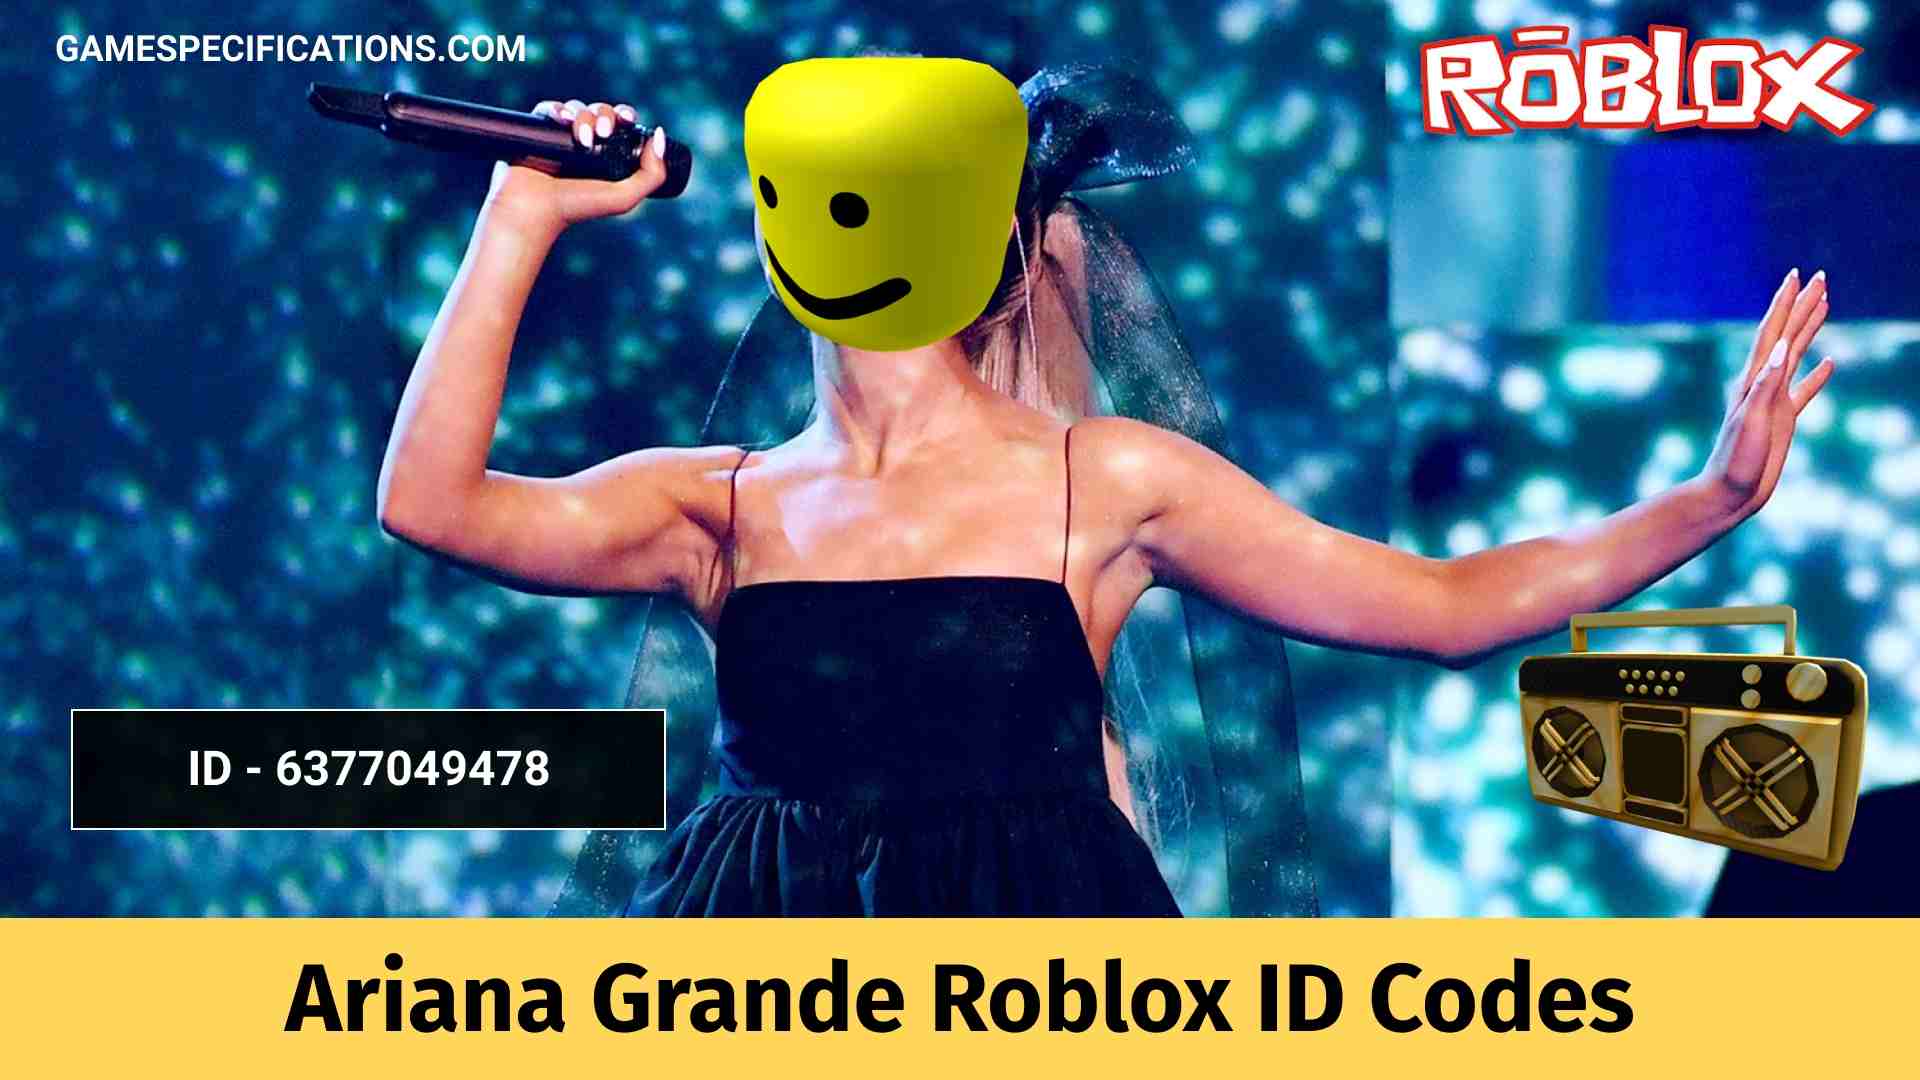 All Famous Ariana Grande Roblox Id Codes 2021 Game Specifications - roblox id pictures bloxburg